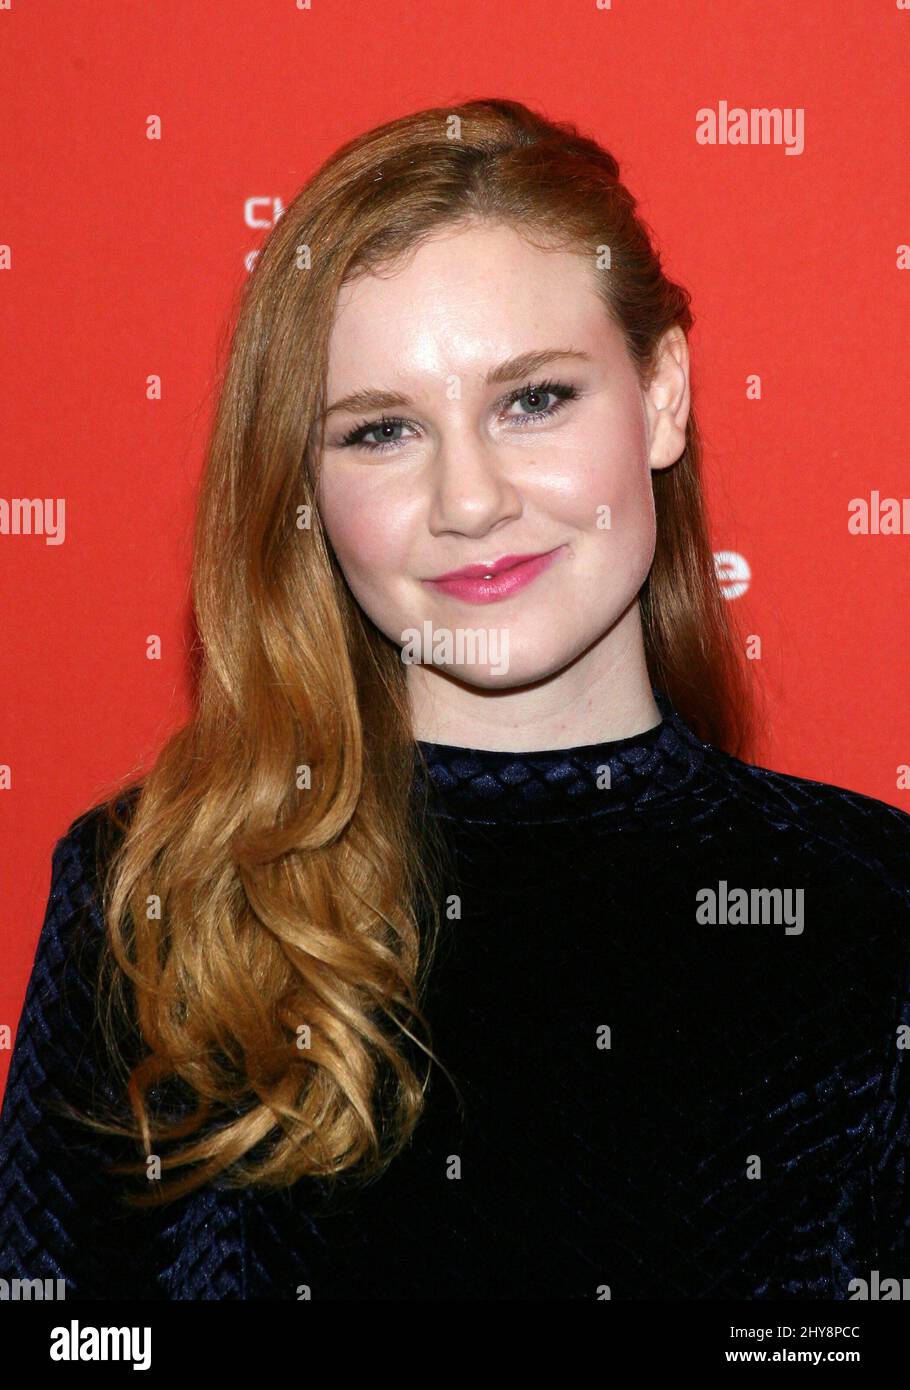 Madisen Beaty attending the 'Other People' Premiere at Sundance Film Festival 2016 held at The Eccles Theatre in Park City, Utah. Stock Photo